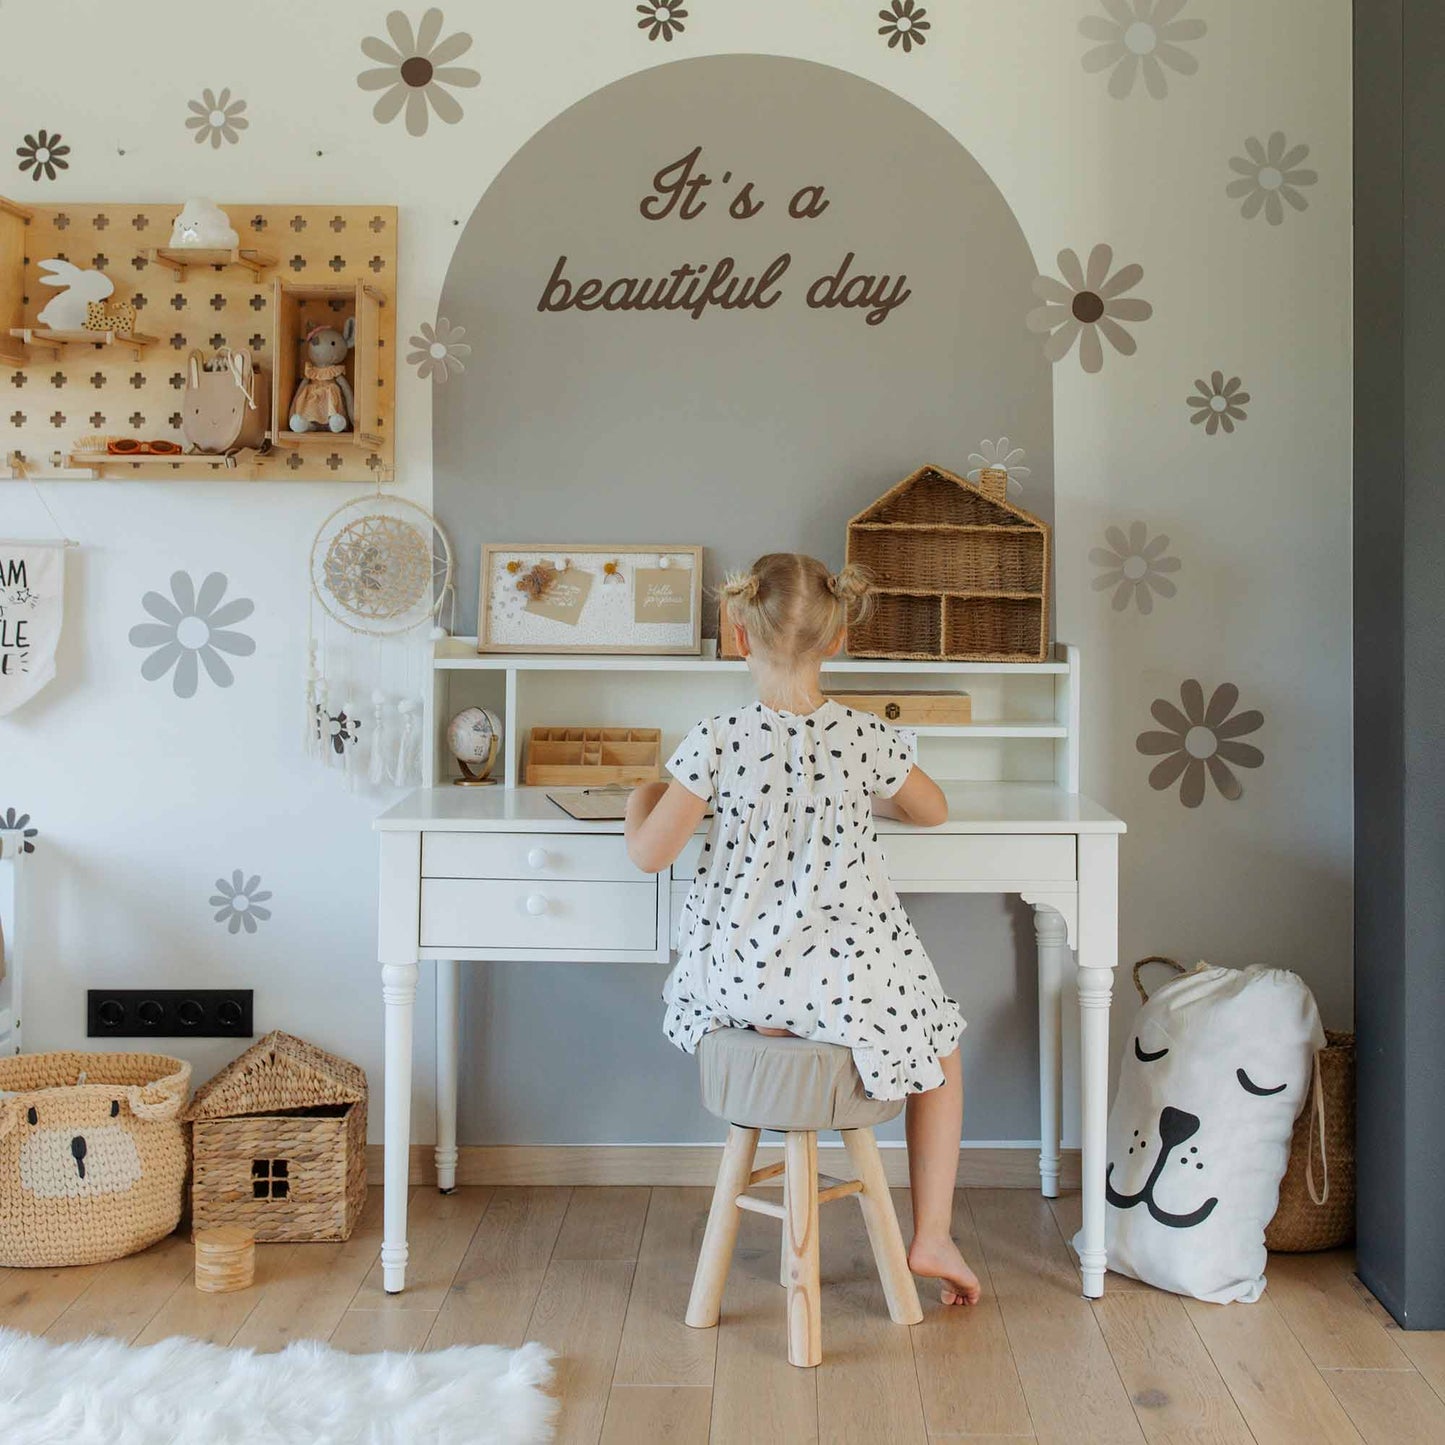 A child sits at a versatile pedestal desk adorned with decorative storage baskets and toys. The table with a hutch above provides extra space for books and art supplies. The wall behind features a decal reading "It's a beautiful day" adorned with floral designs.